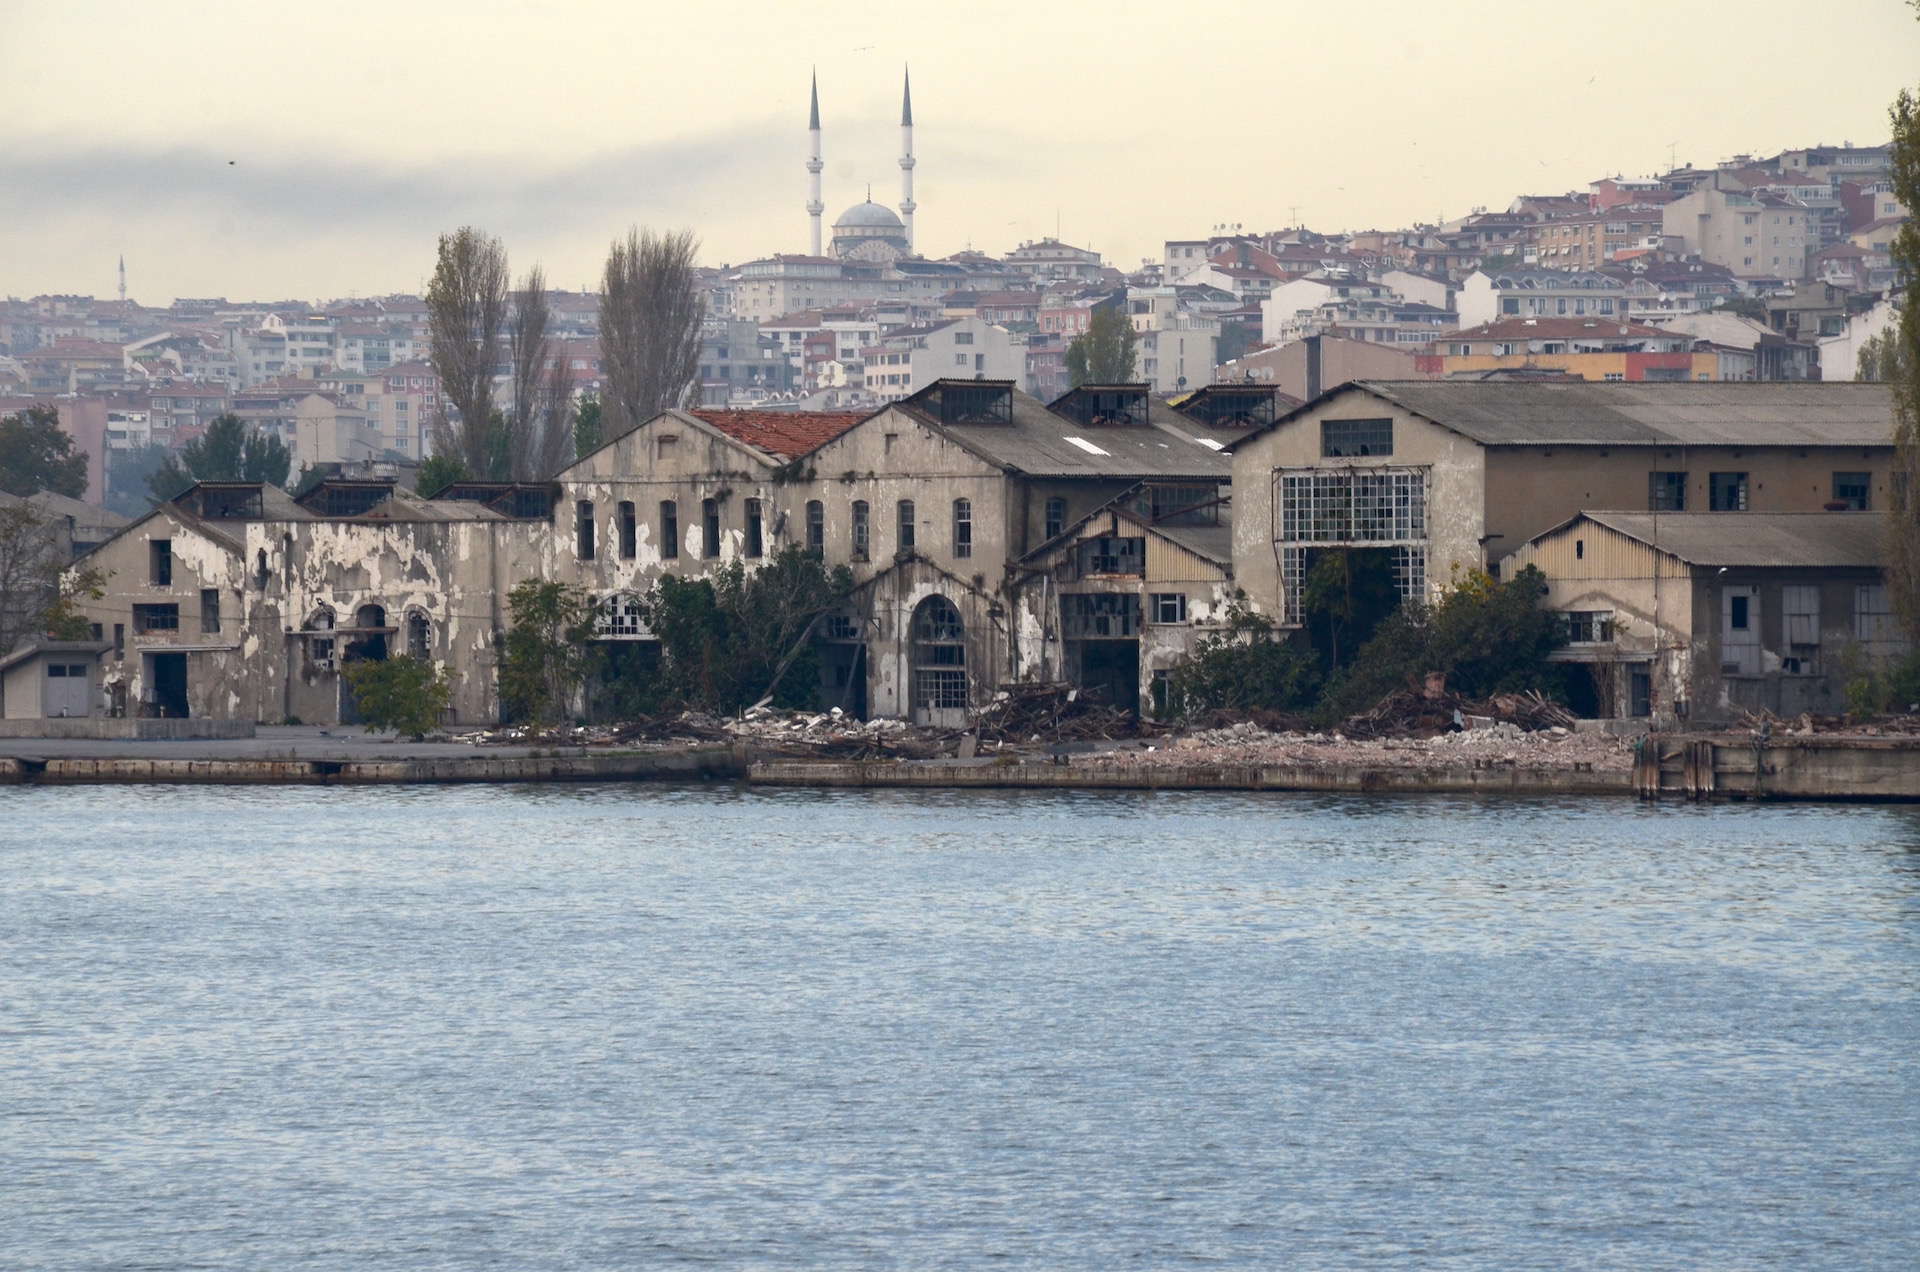 Crumbling buildings at the Imperial Shipyard in Istanbul, Turkey